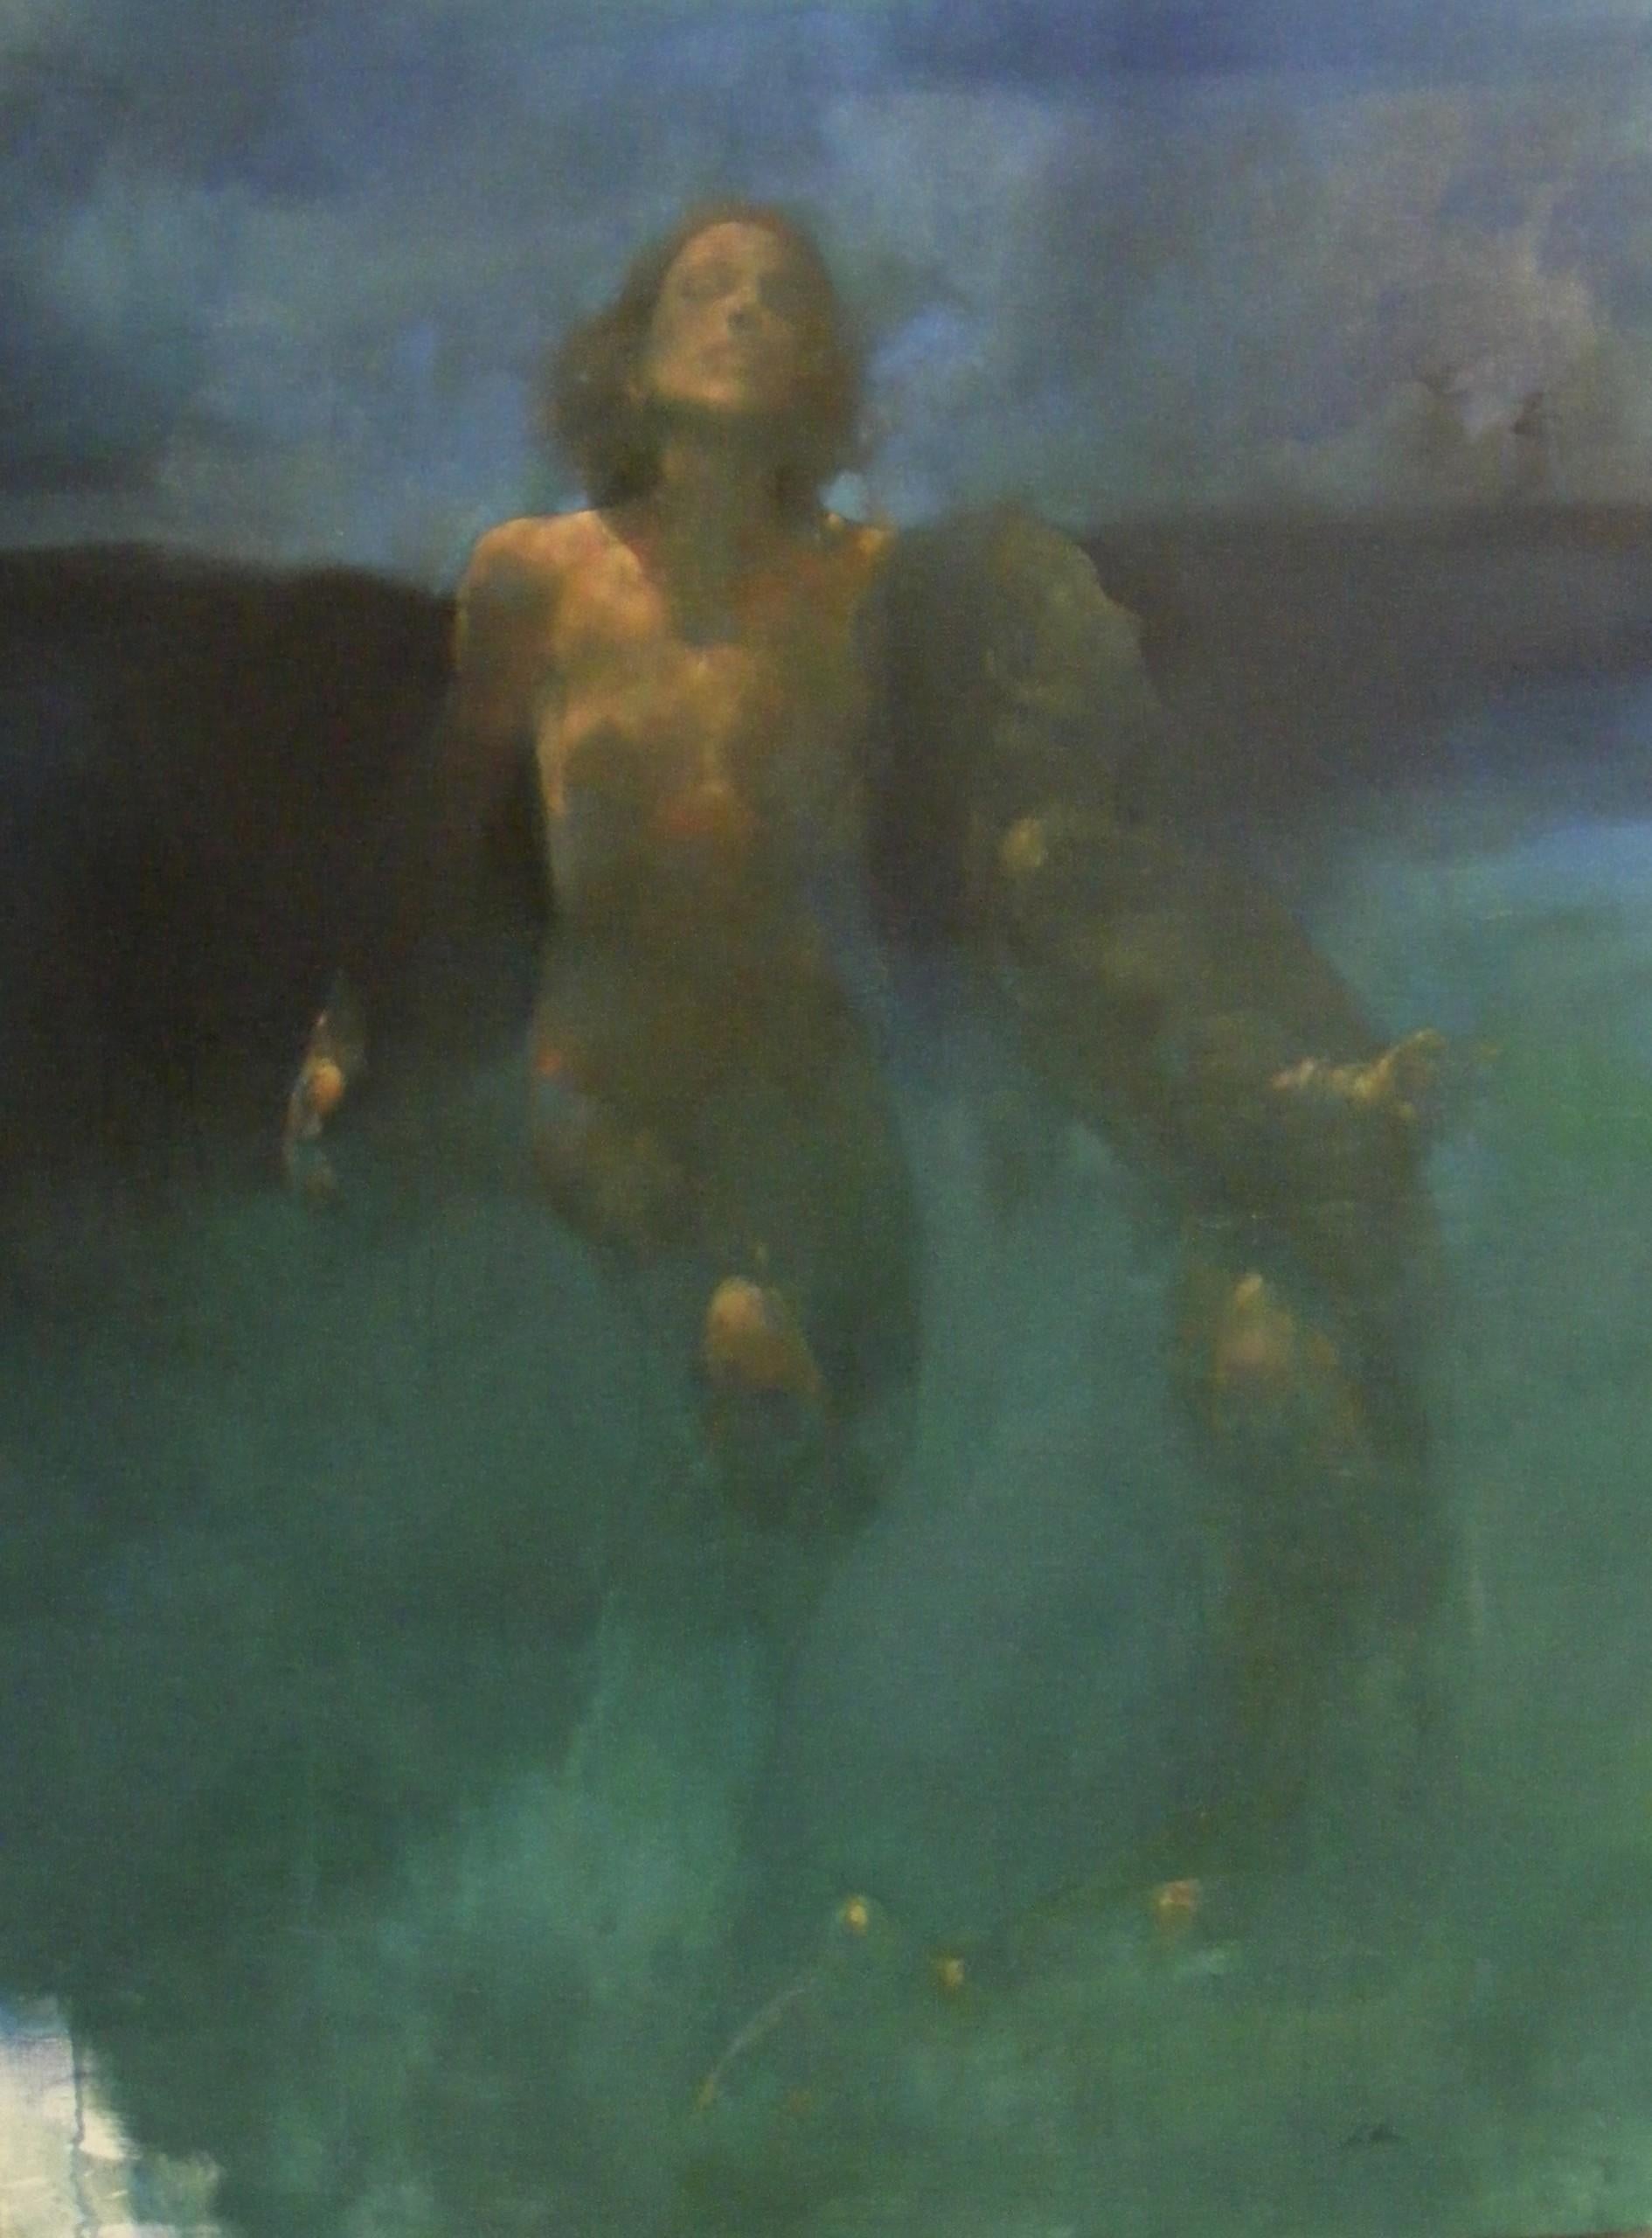 ‘Morphosis II’ has been painted by the artist, Bill Bate, using oil paint on canvas.

This painting started out as a single figure but has been heavily reworked evolving into a scene depicting two bodies. The emphasis is on the different aspects of